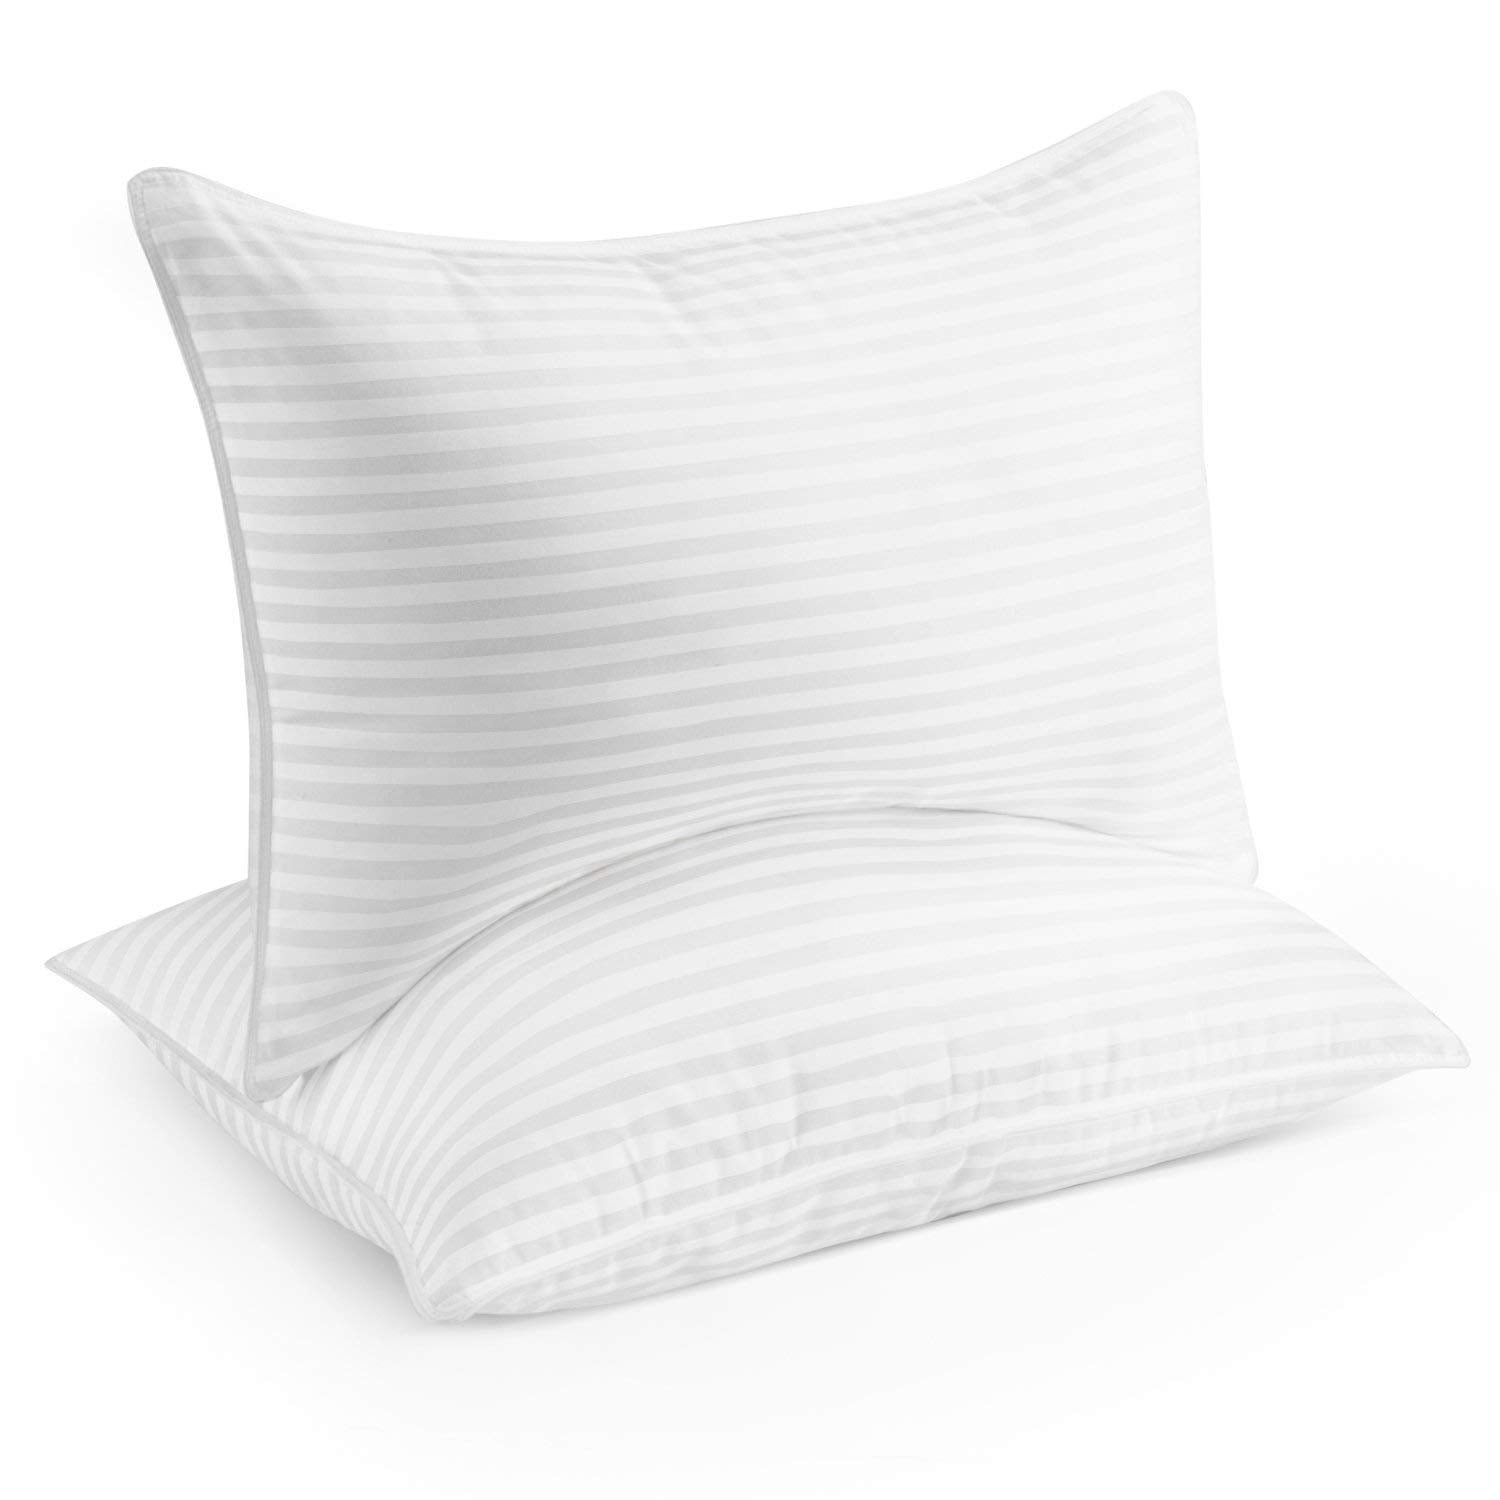 Beckham Luxury Linens Hotel Collection Bed Pillow White - Queen